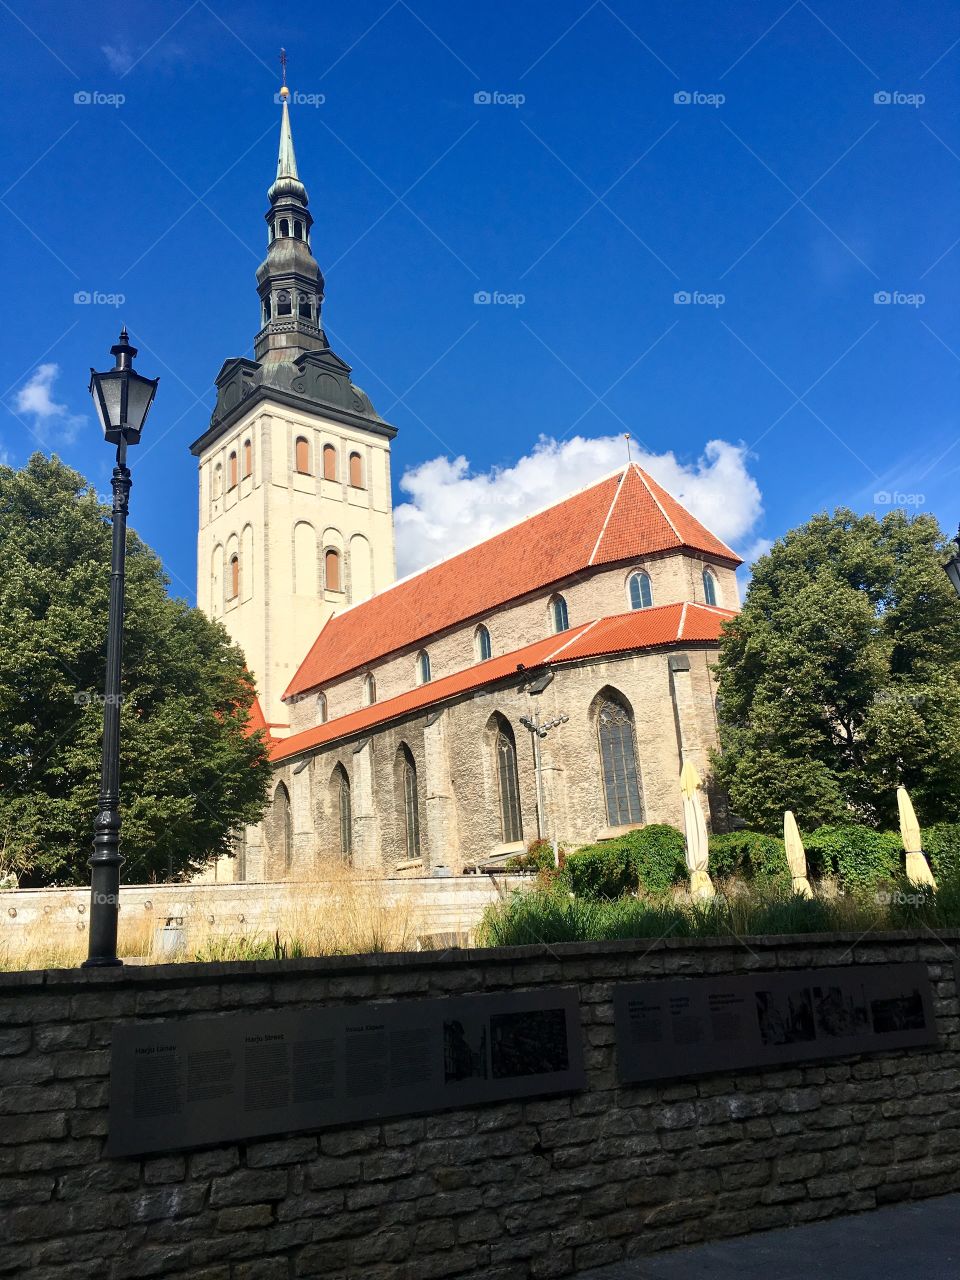 St John's church old town Tallinn Estonia, Estonia's primary religious tradition has been Lutheranism, with a Catholic polity, and episcopal government. The church was dedicated to Saint John the Evangelist, a disciple of Jesus Christ. Opened in 1867